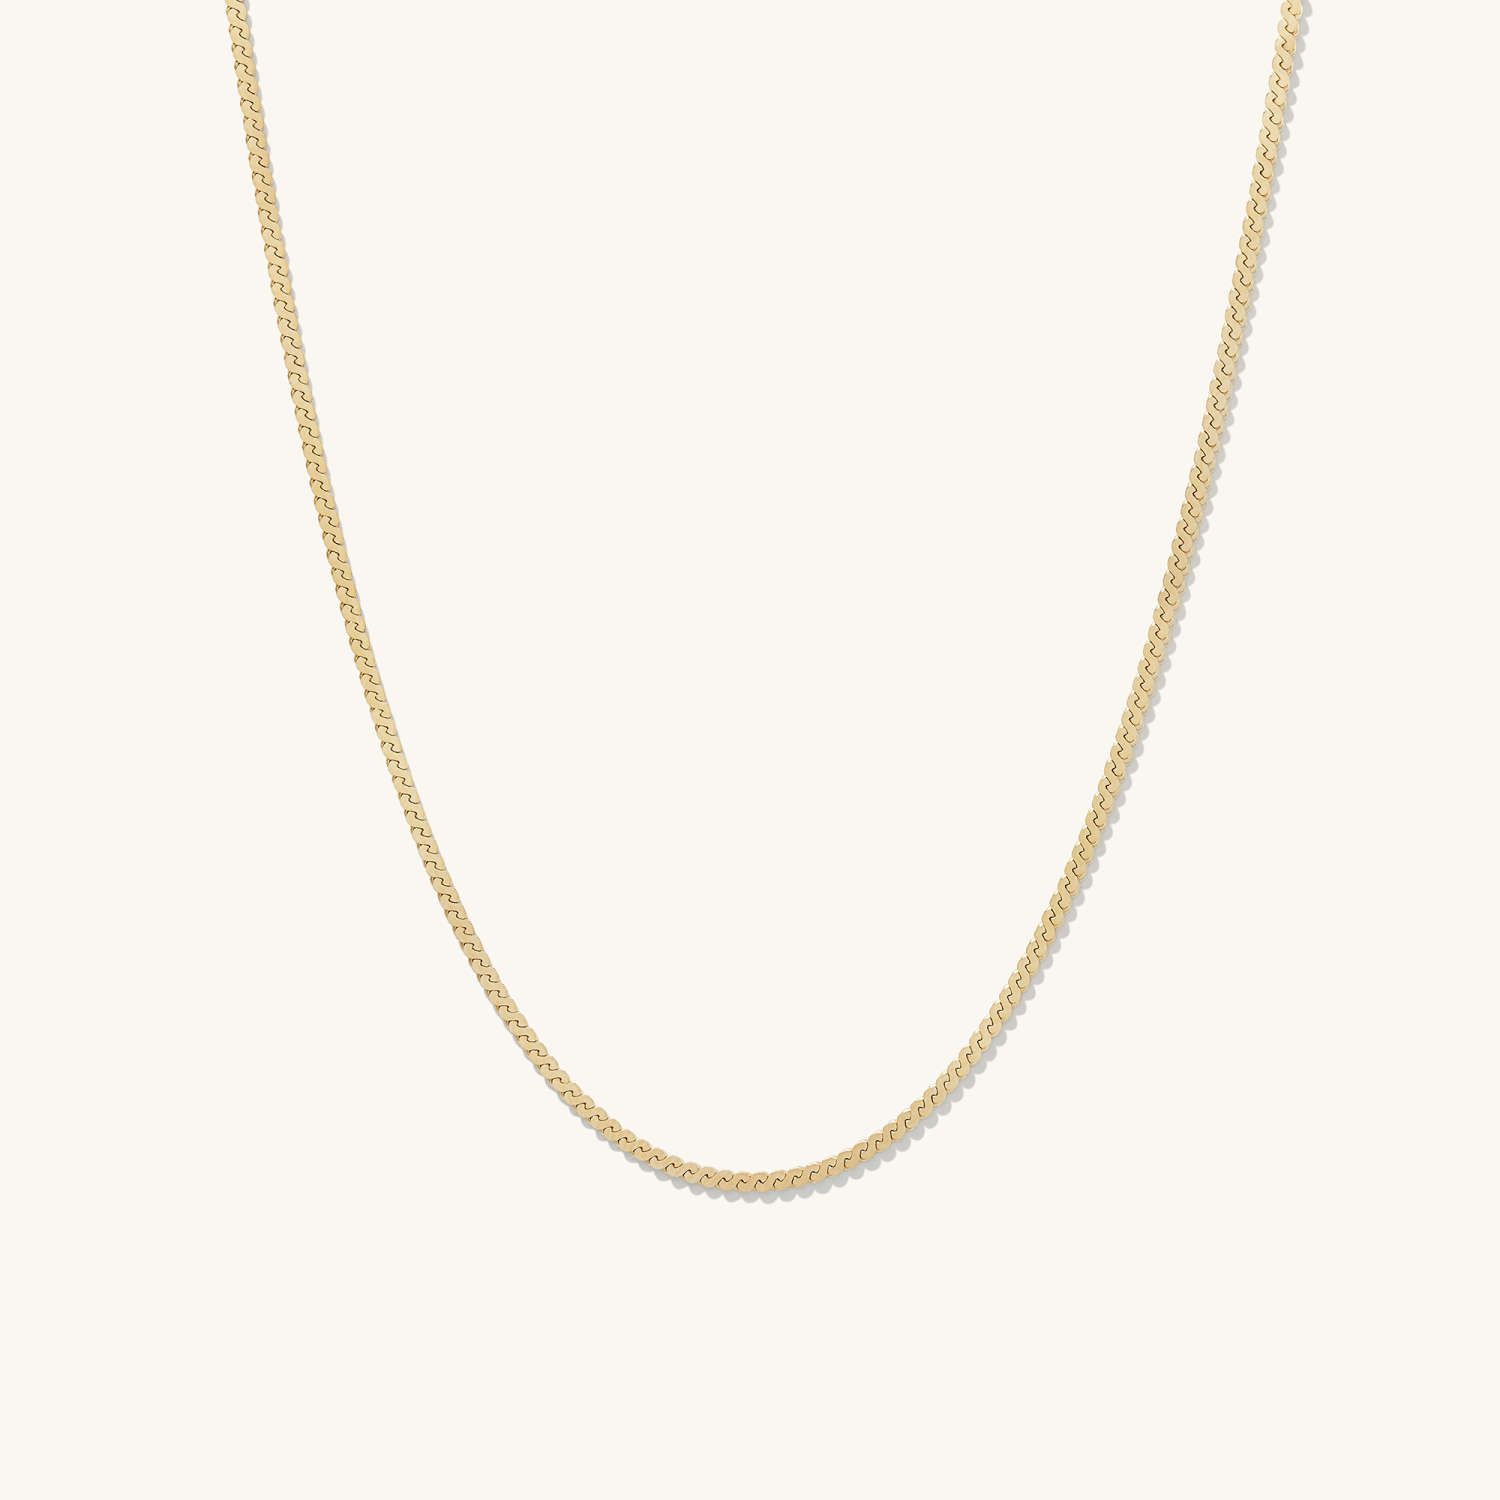 Serpentine Chain Necklace - From £450 | Mejuri (Global)